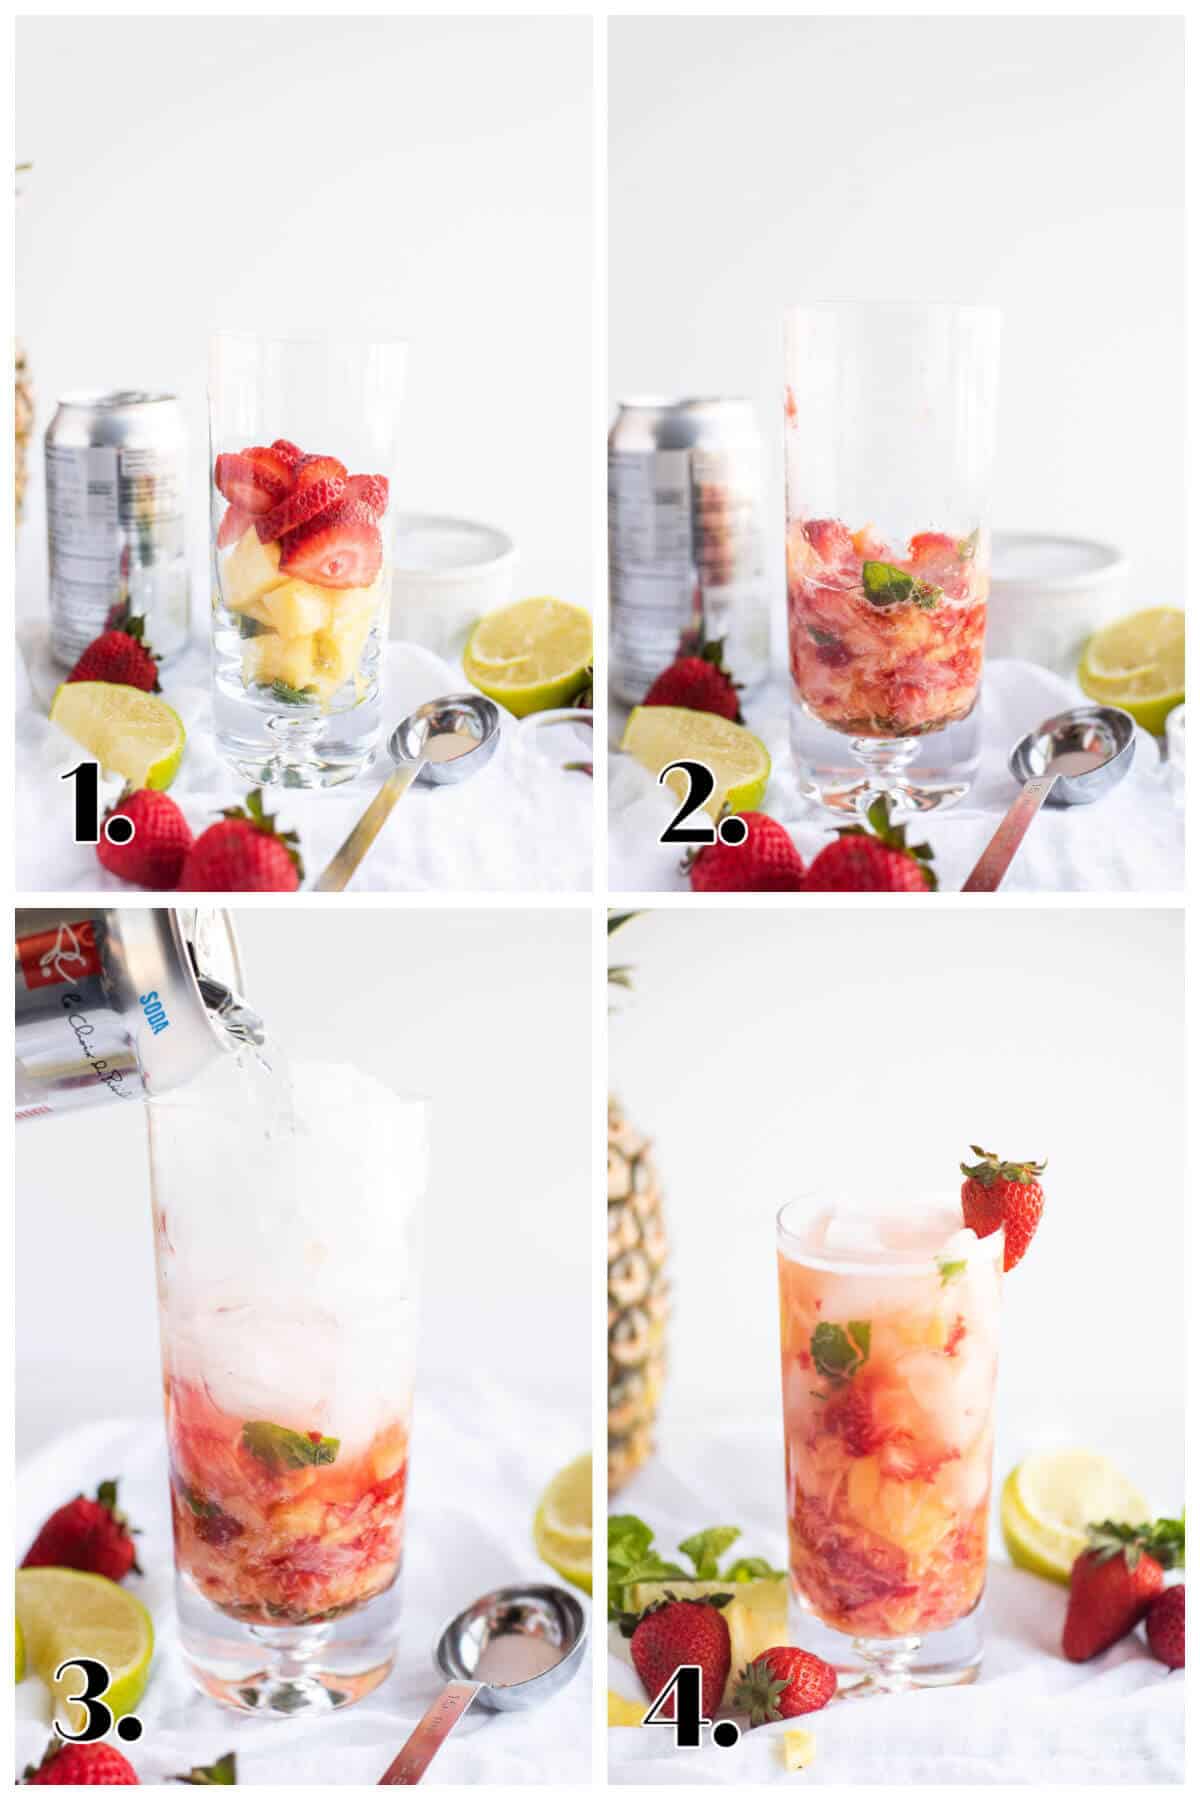 4 image collage showing how to make a strawberry pineapple mojito: 1-add fruit and mint to glass; 2-muddle fruit; 3-add sugar, rum extract, ice, and sparkling water; 4-stir and garnish.